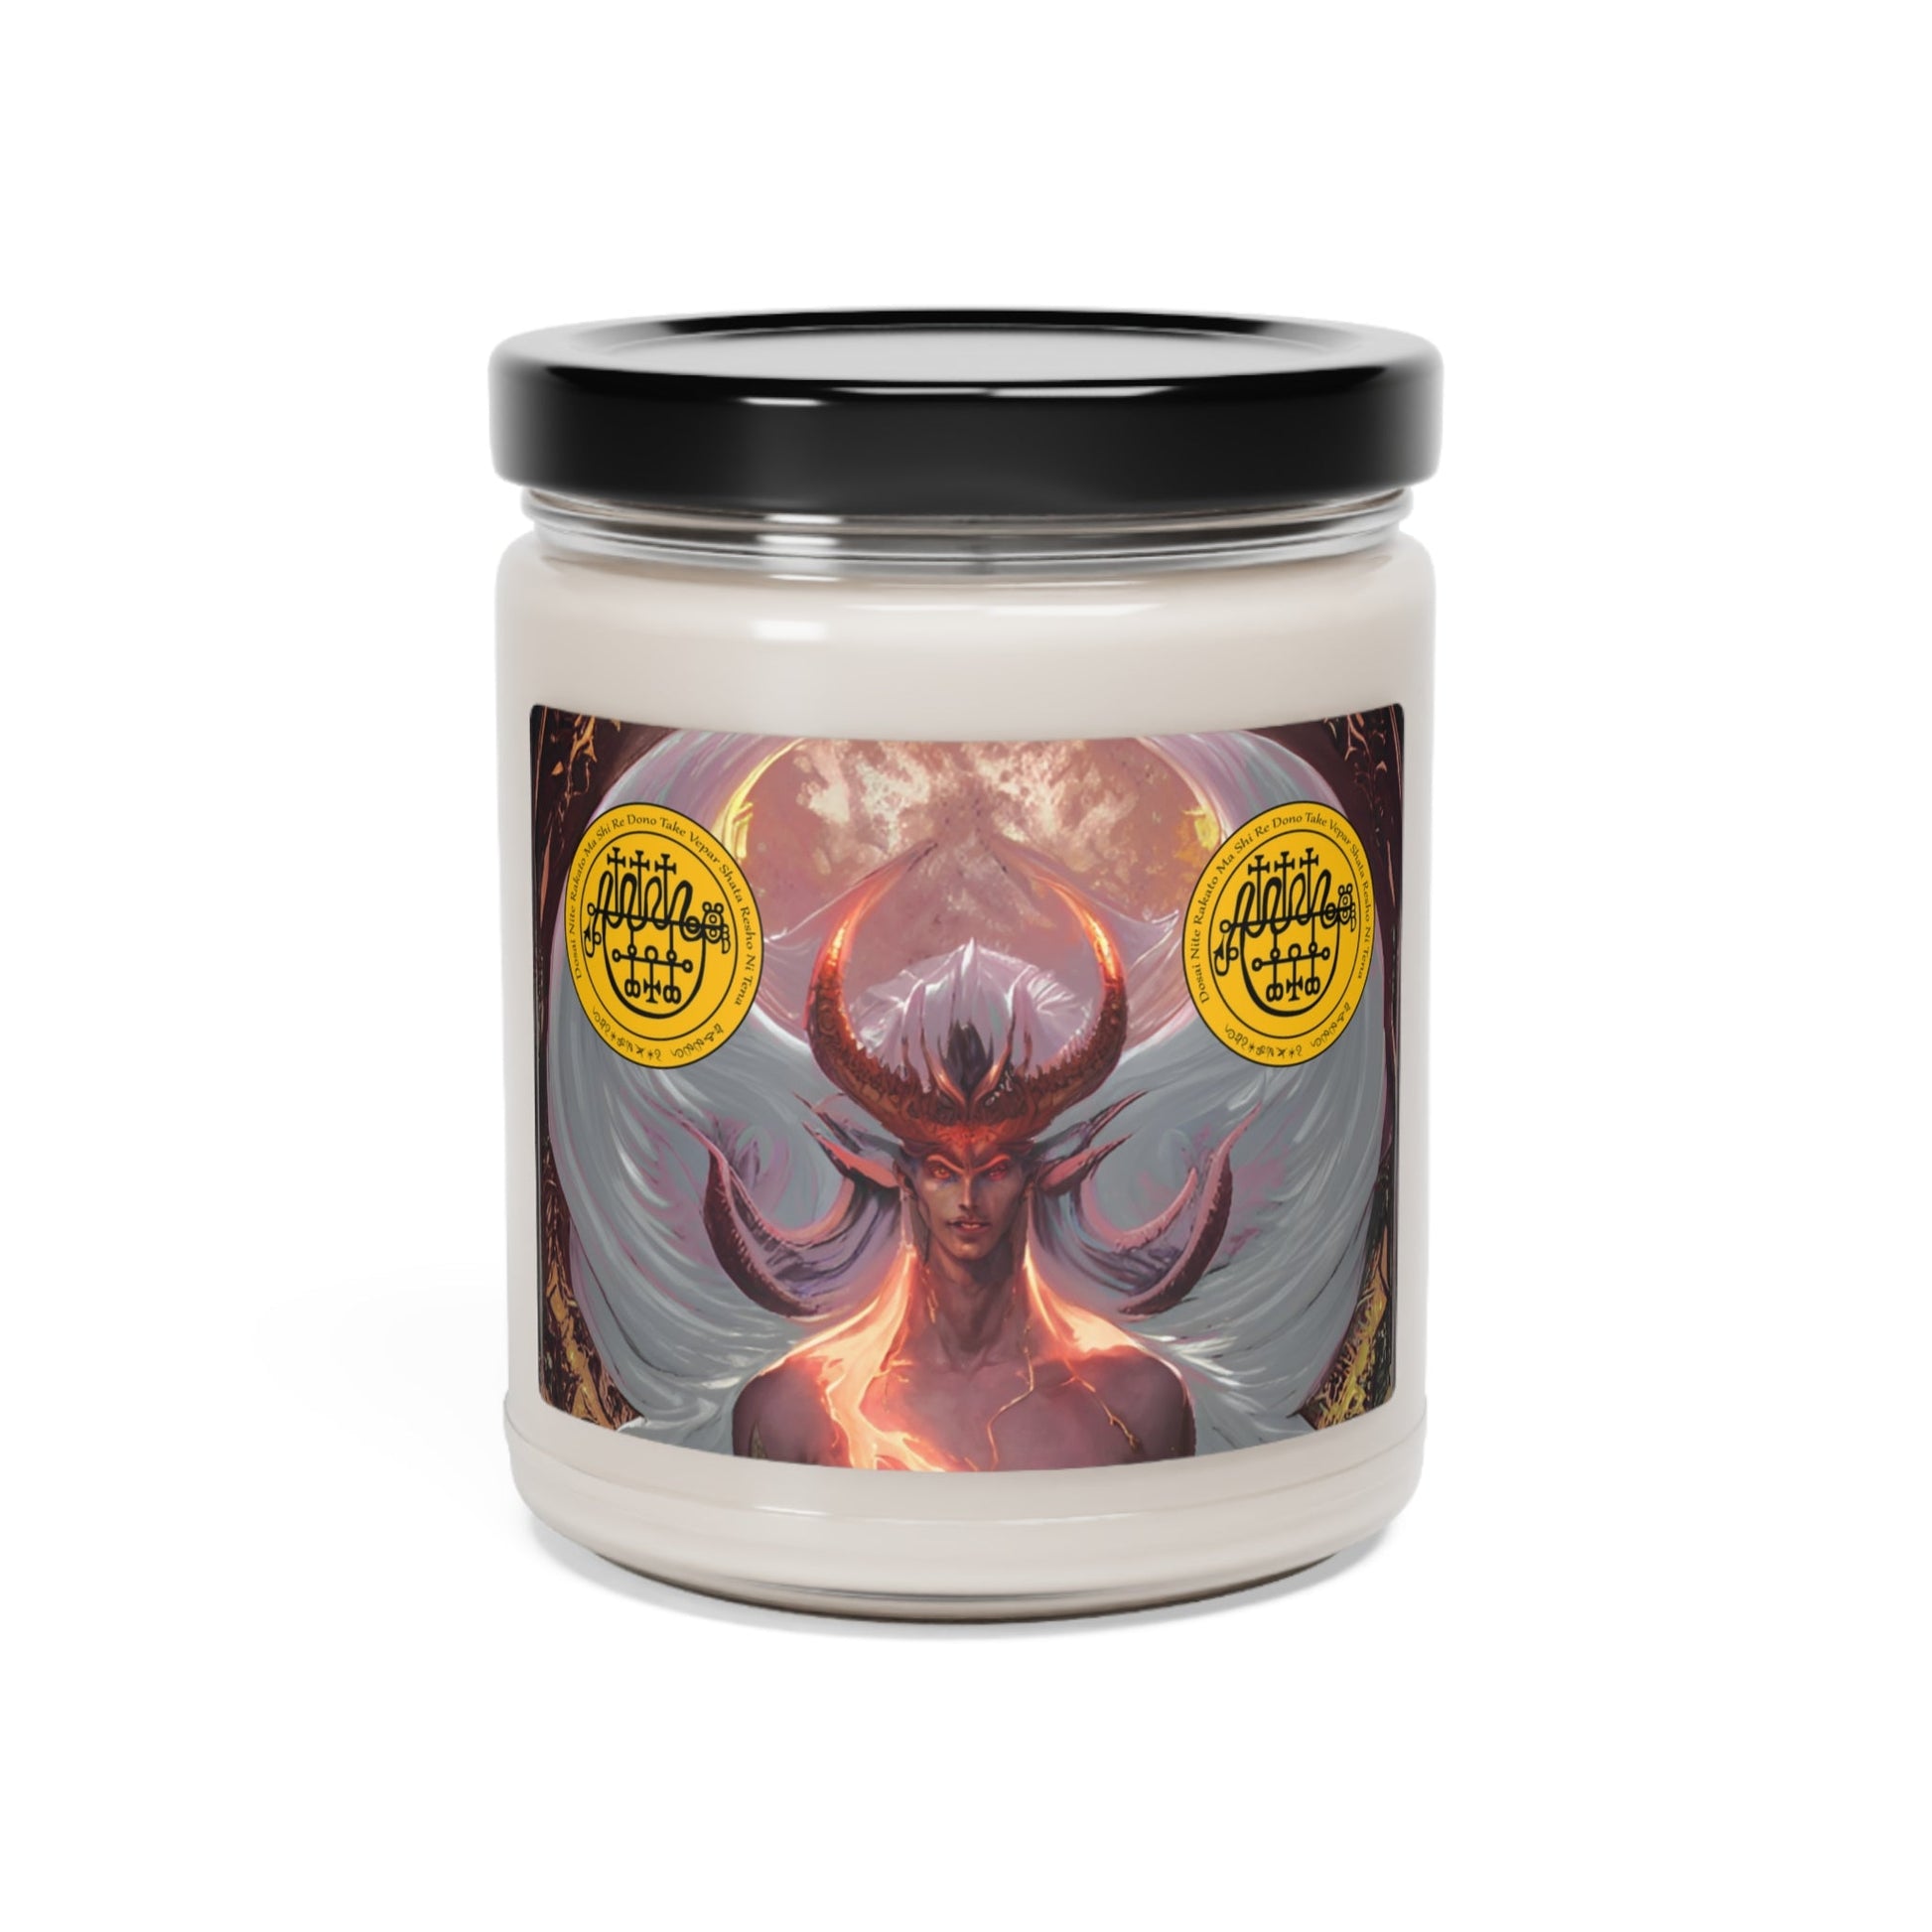 Demon-Vepar-Altar-Scented-Soy-Candle-for-offerings-rituals-initiations-or-praying-and-meditation-11